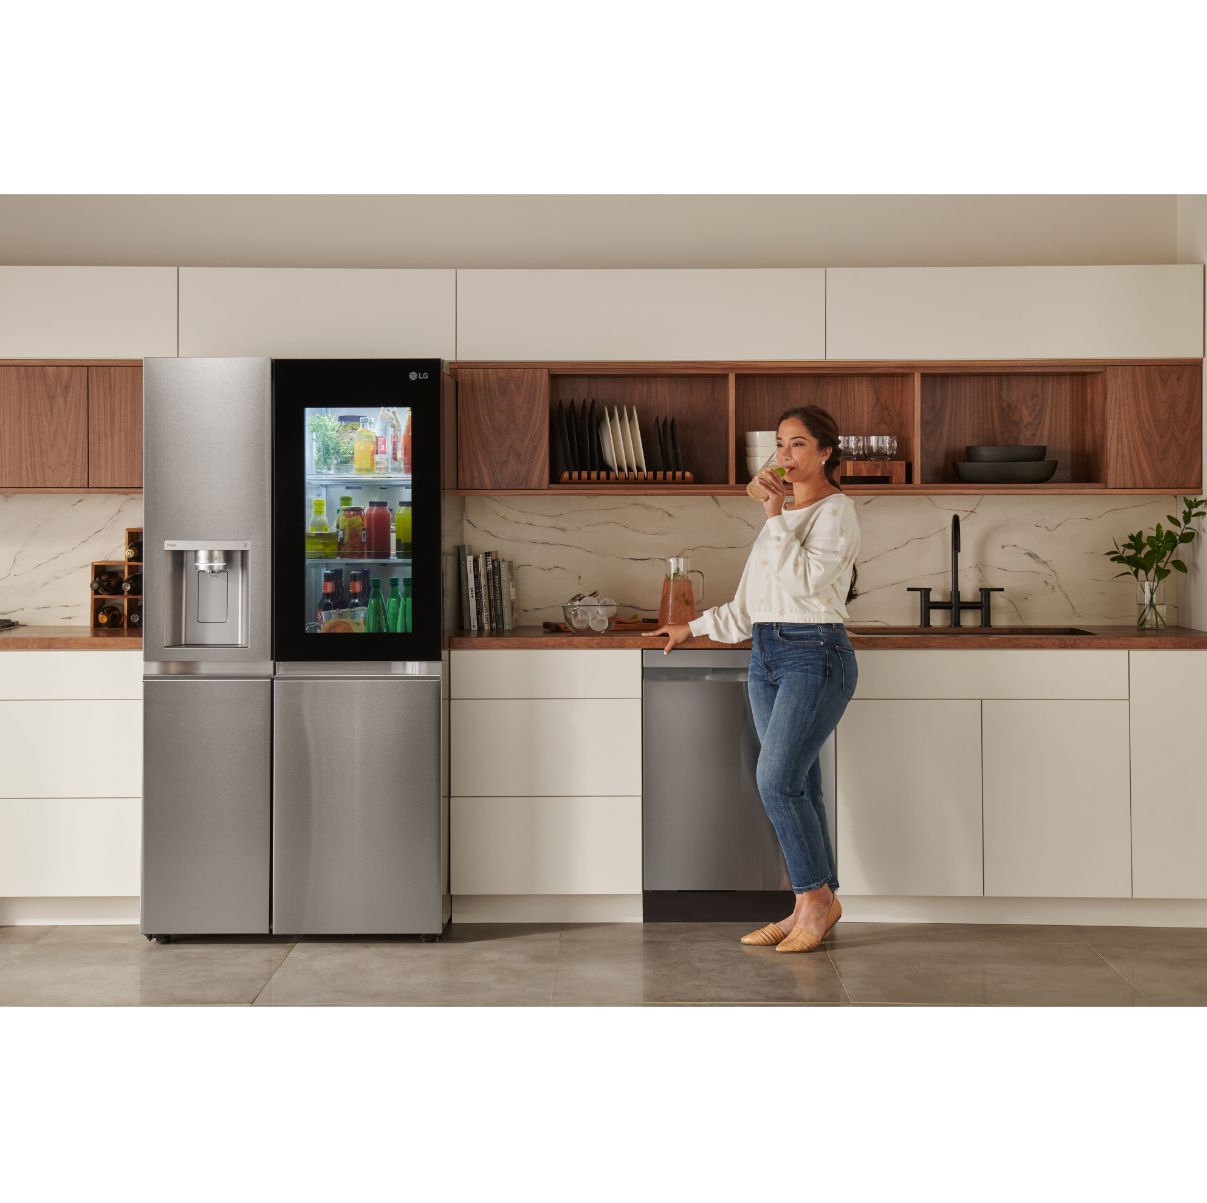 LG 36 Inch Side-by-Side Counter-Depth InstaView Refrigerator with Craft Ice in Stainless Steel 23 Cu. Ft. (LRSOC2306S)